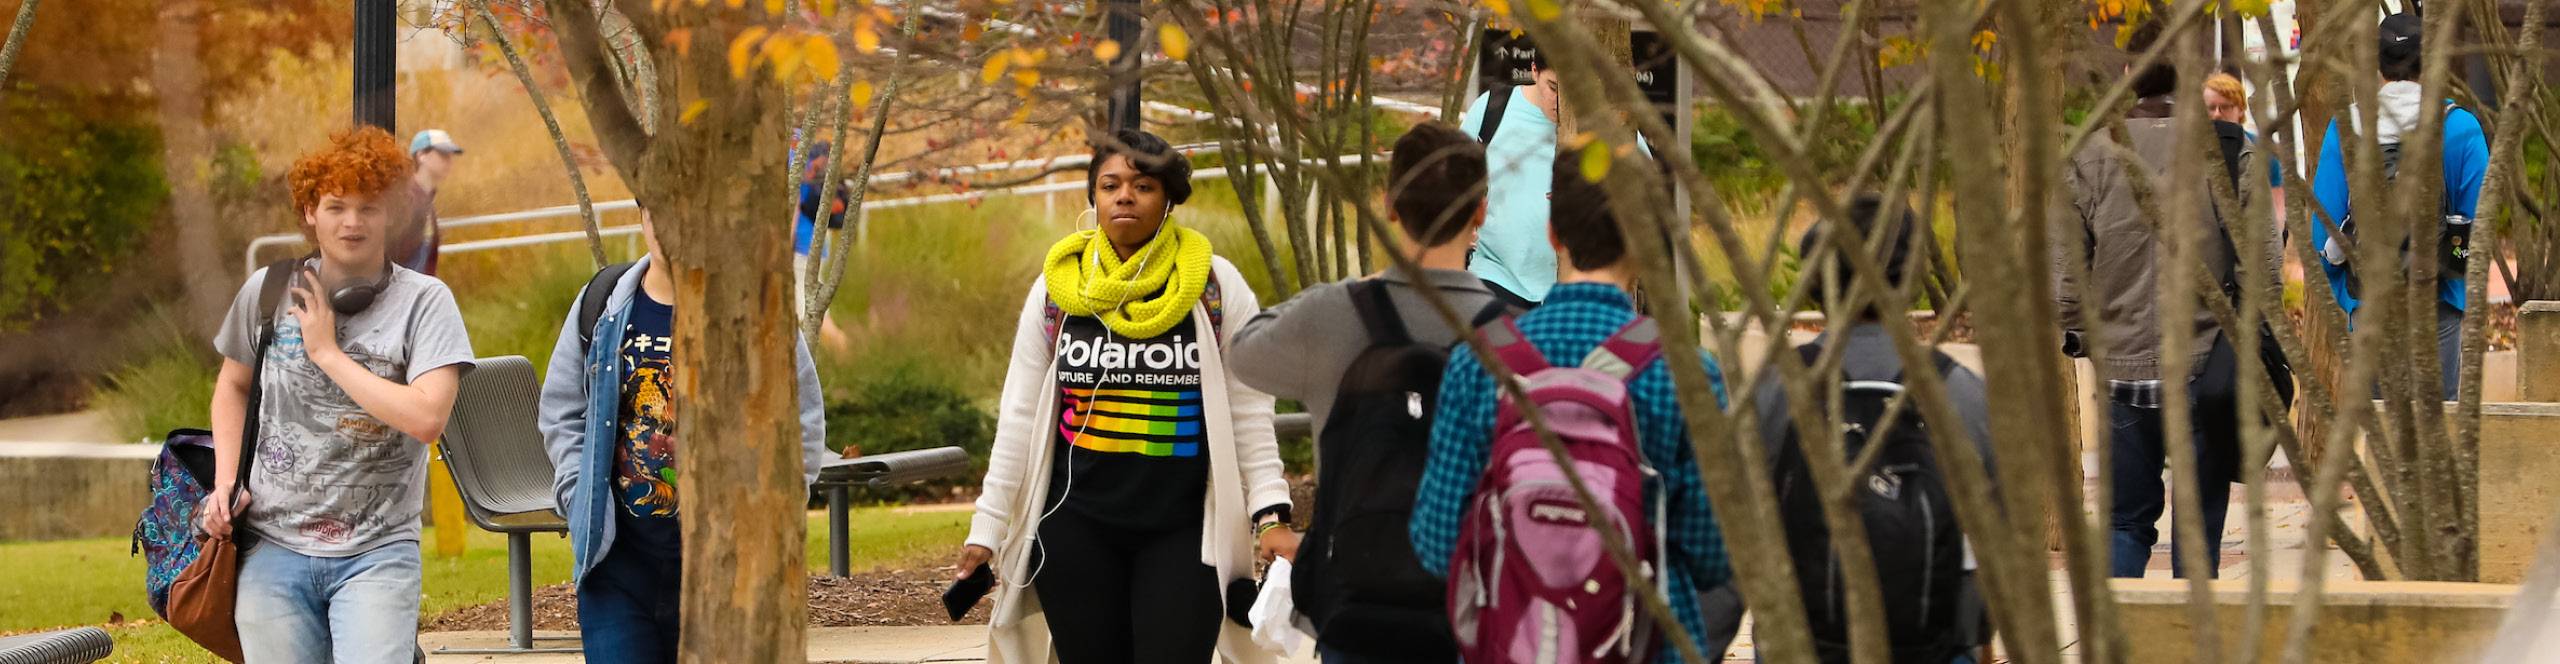 Kennesaw State sees record enrollment for fall 2019 - News